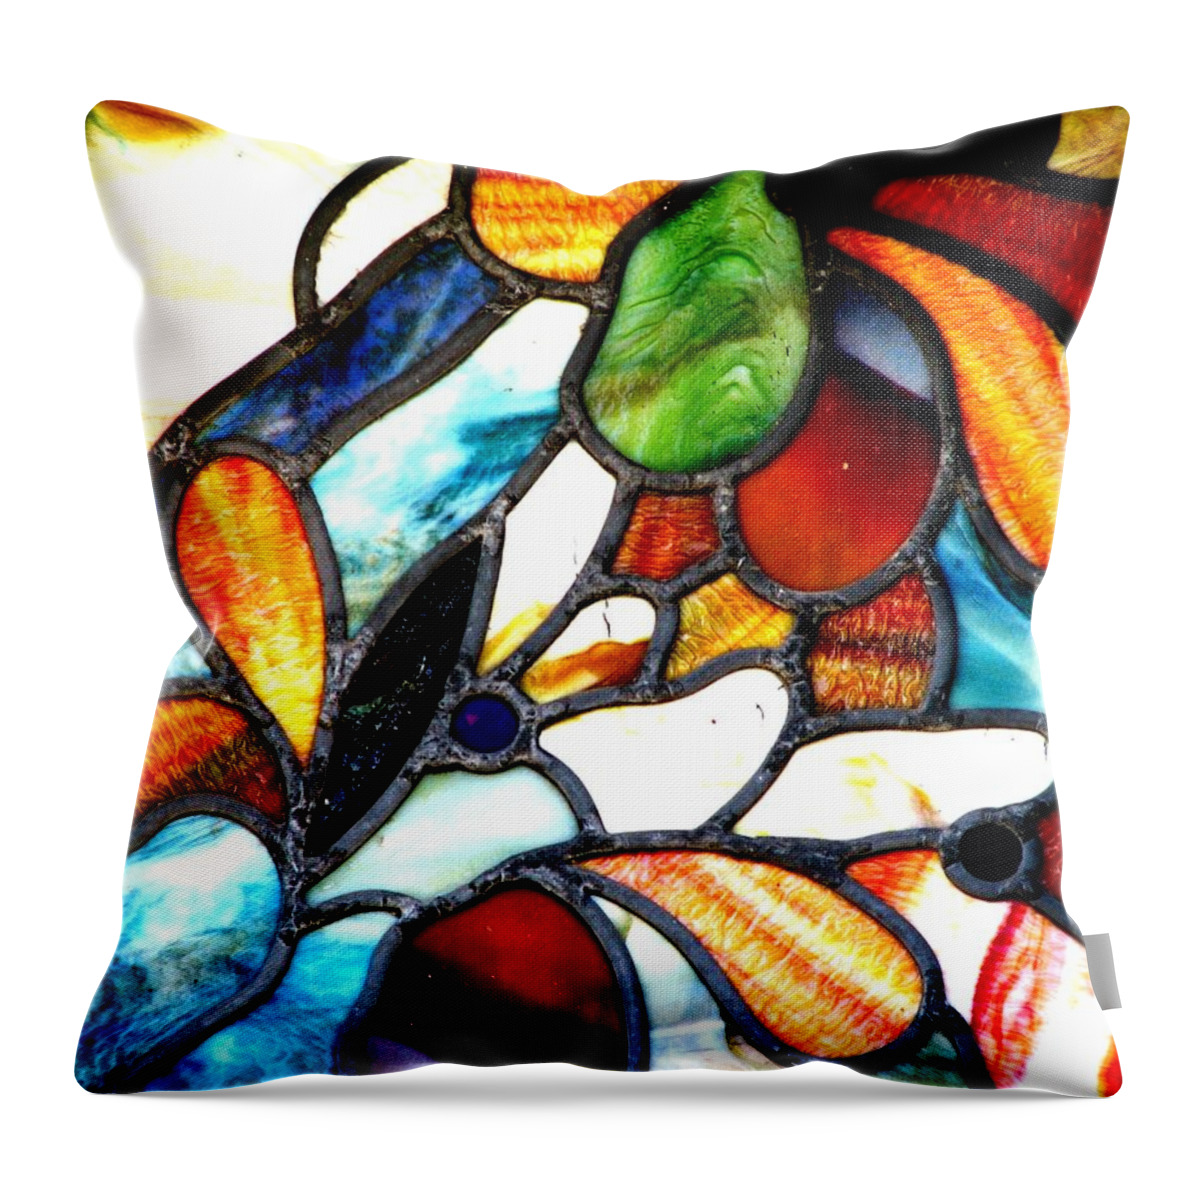 Stained Glass Throw Pillow featuring the photograph Gettysburg College Chapel Window by Angela Davies